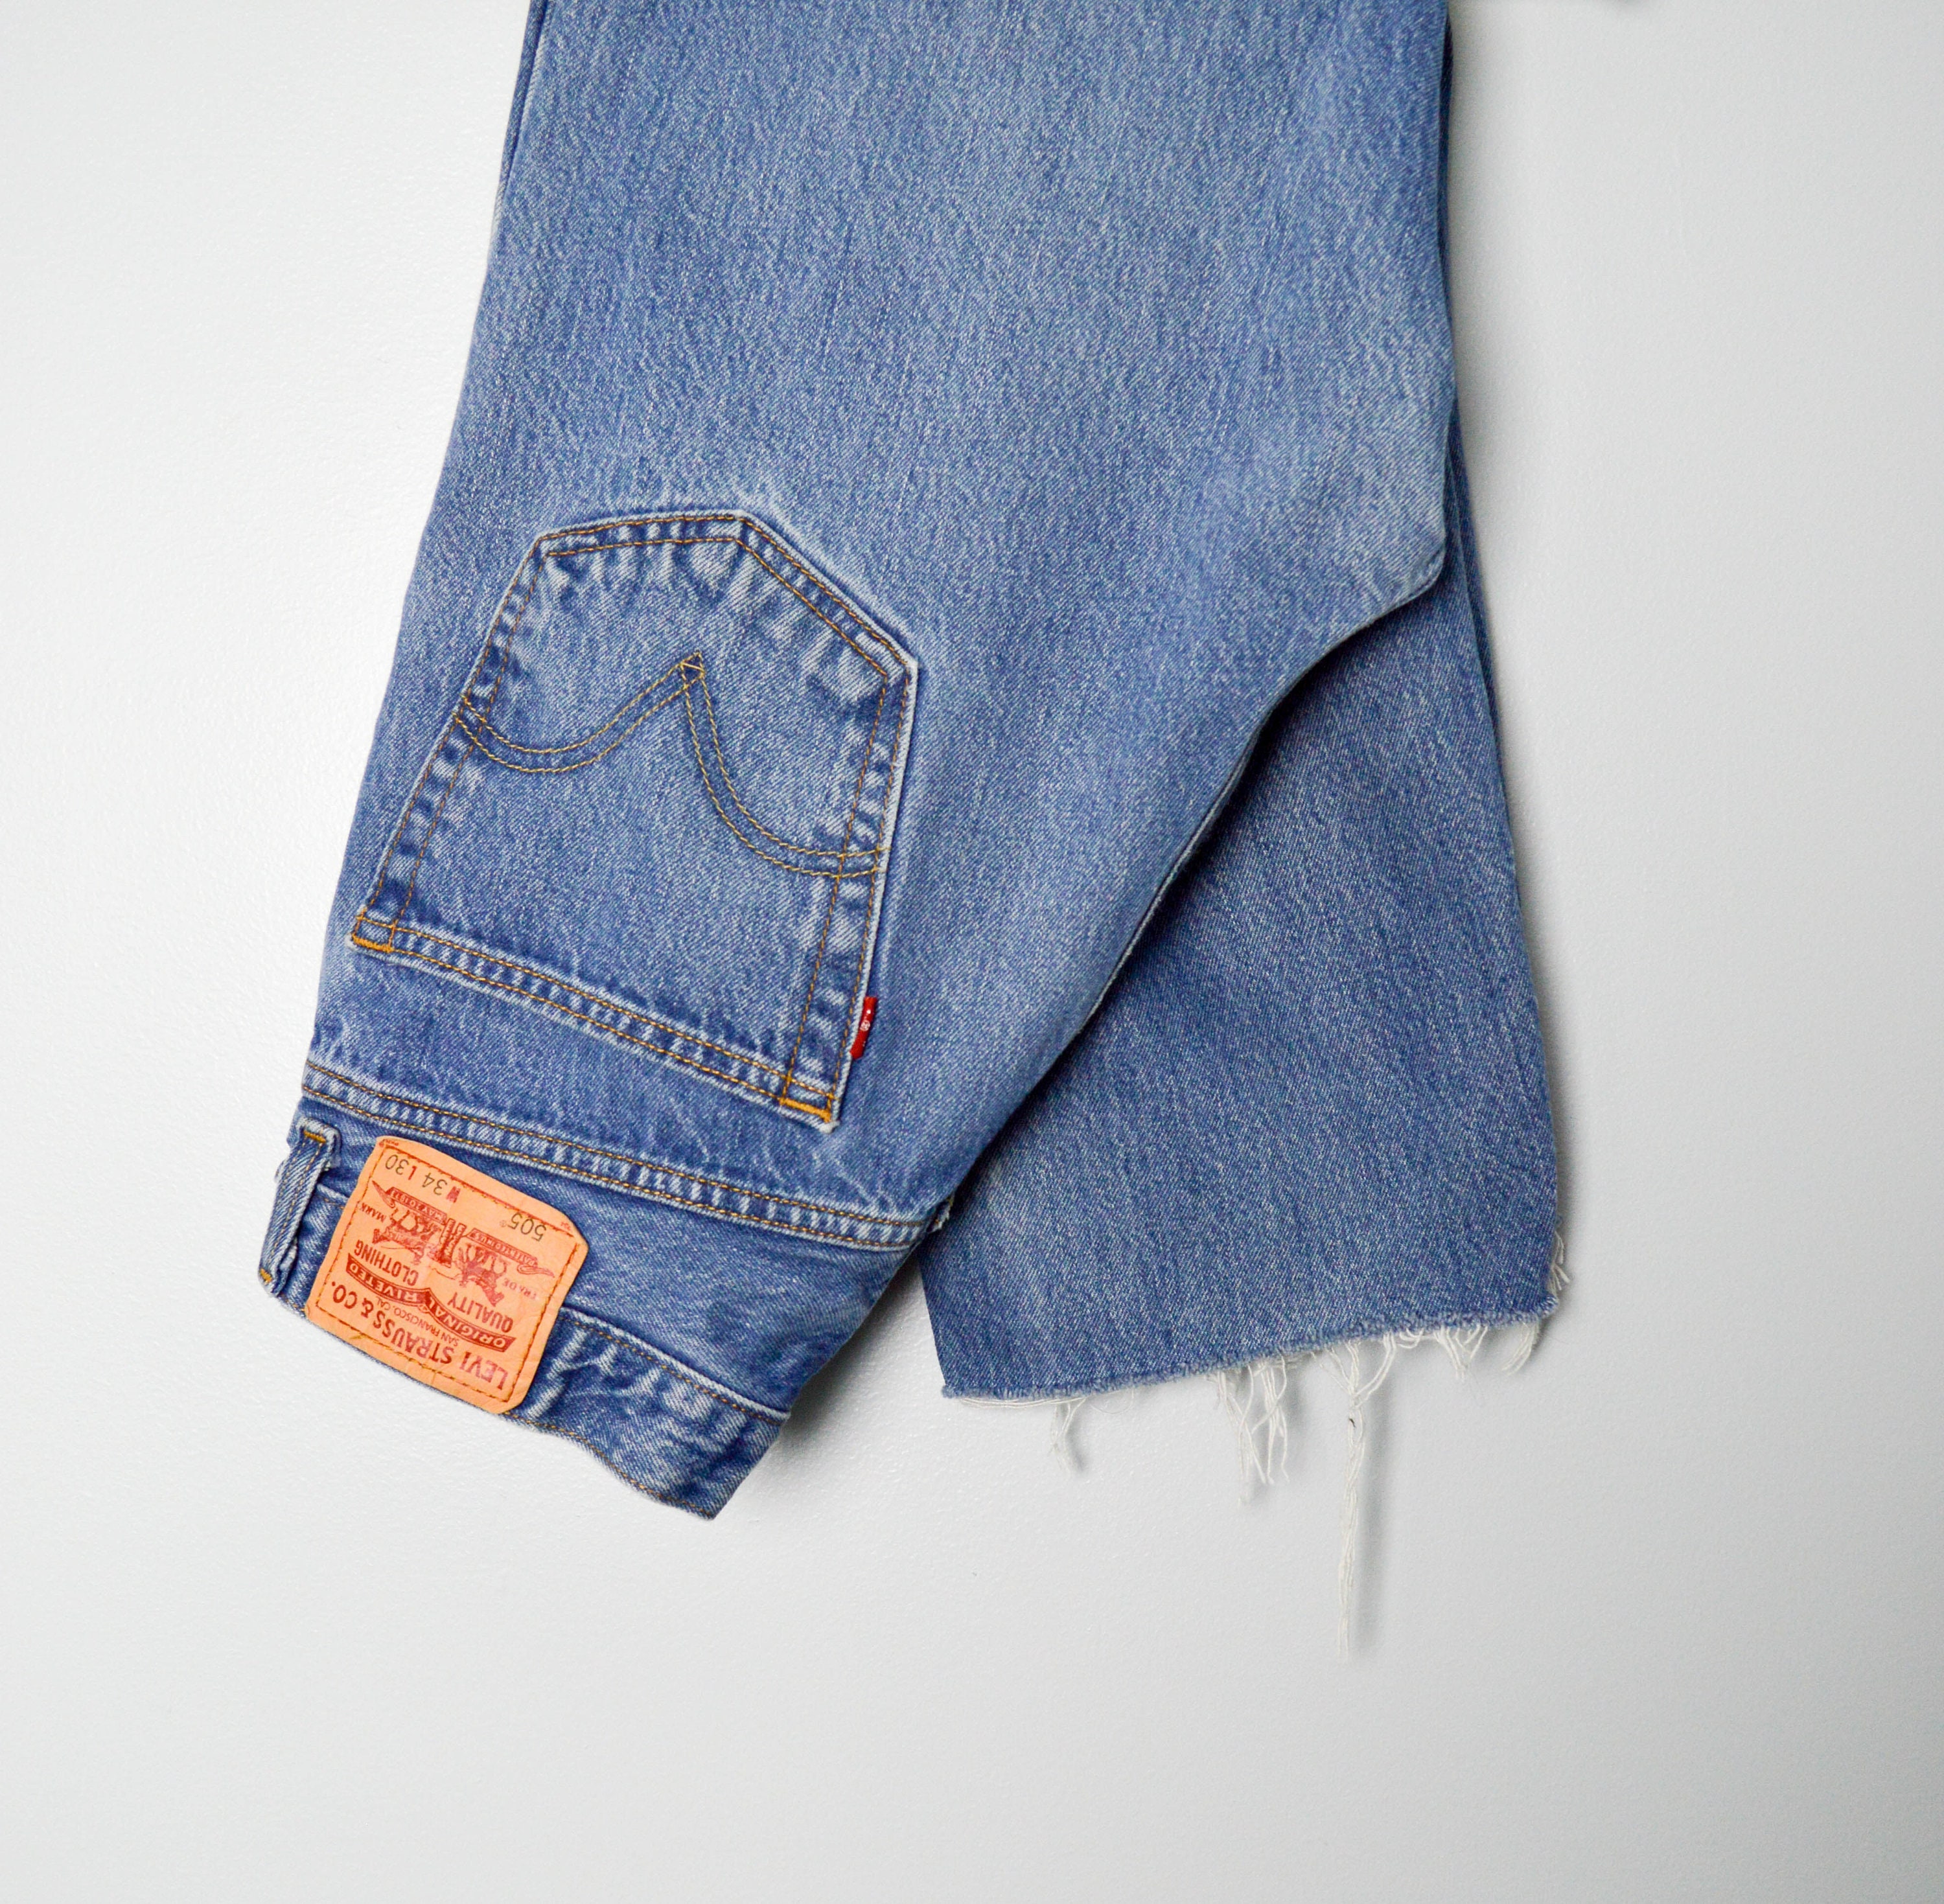 Cropped 505 Levis Jeans 34 Vintage Clothing 90s Clothing - Etsy